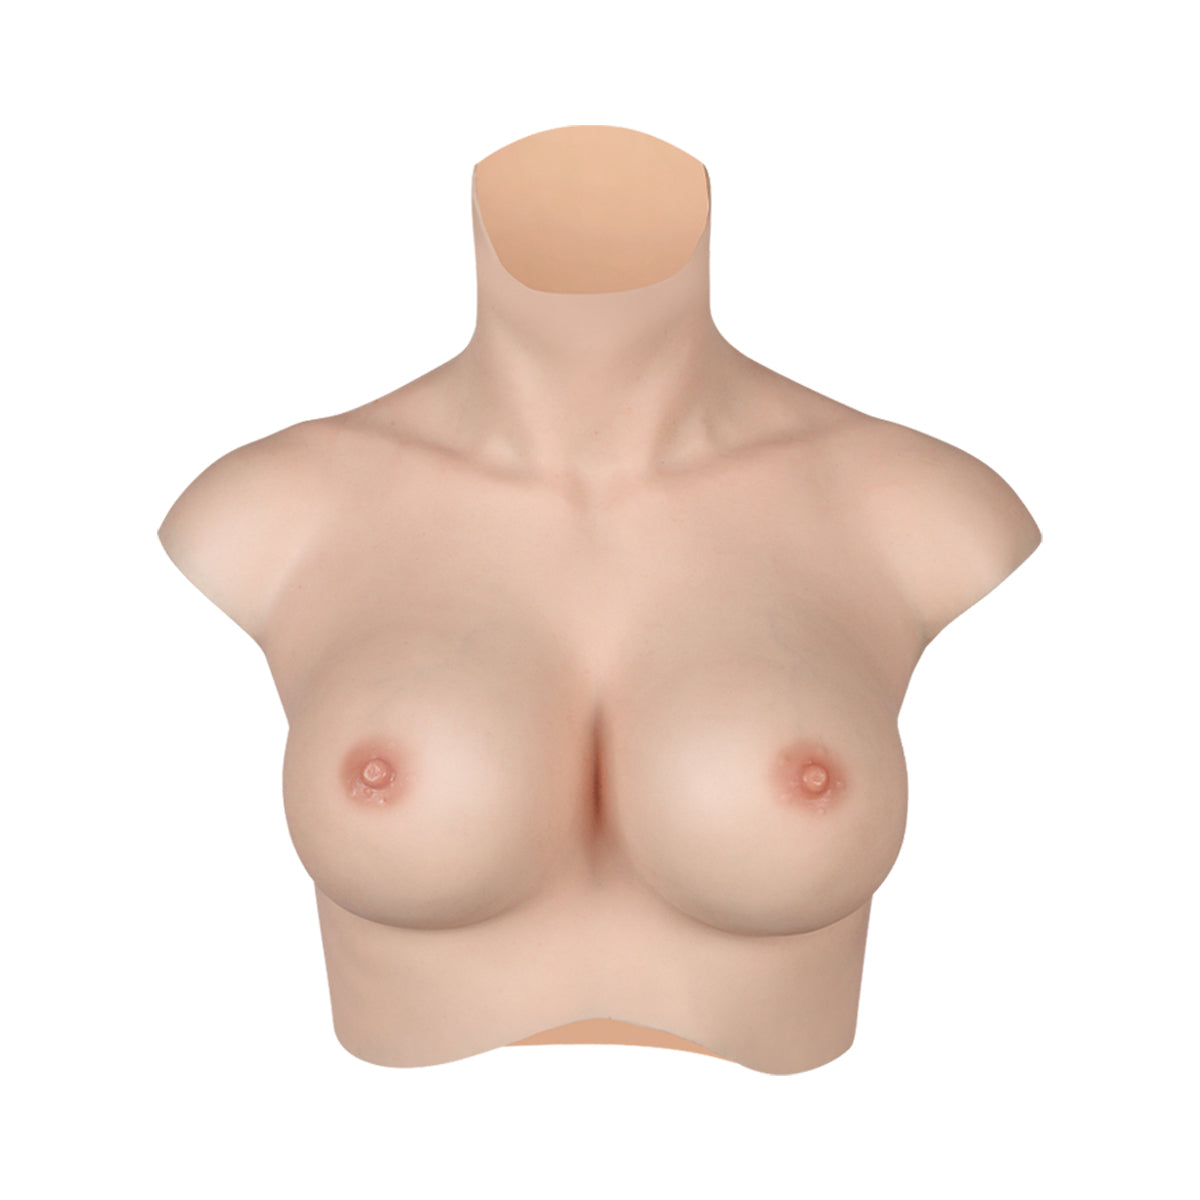 Larger Size B-H Cup Silicone Fill Breast Forms 7G for Crossdresser